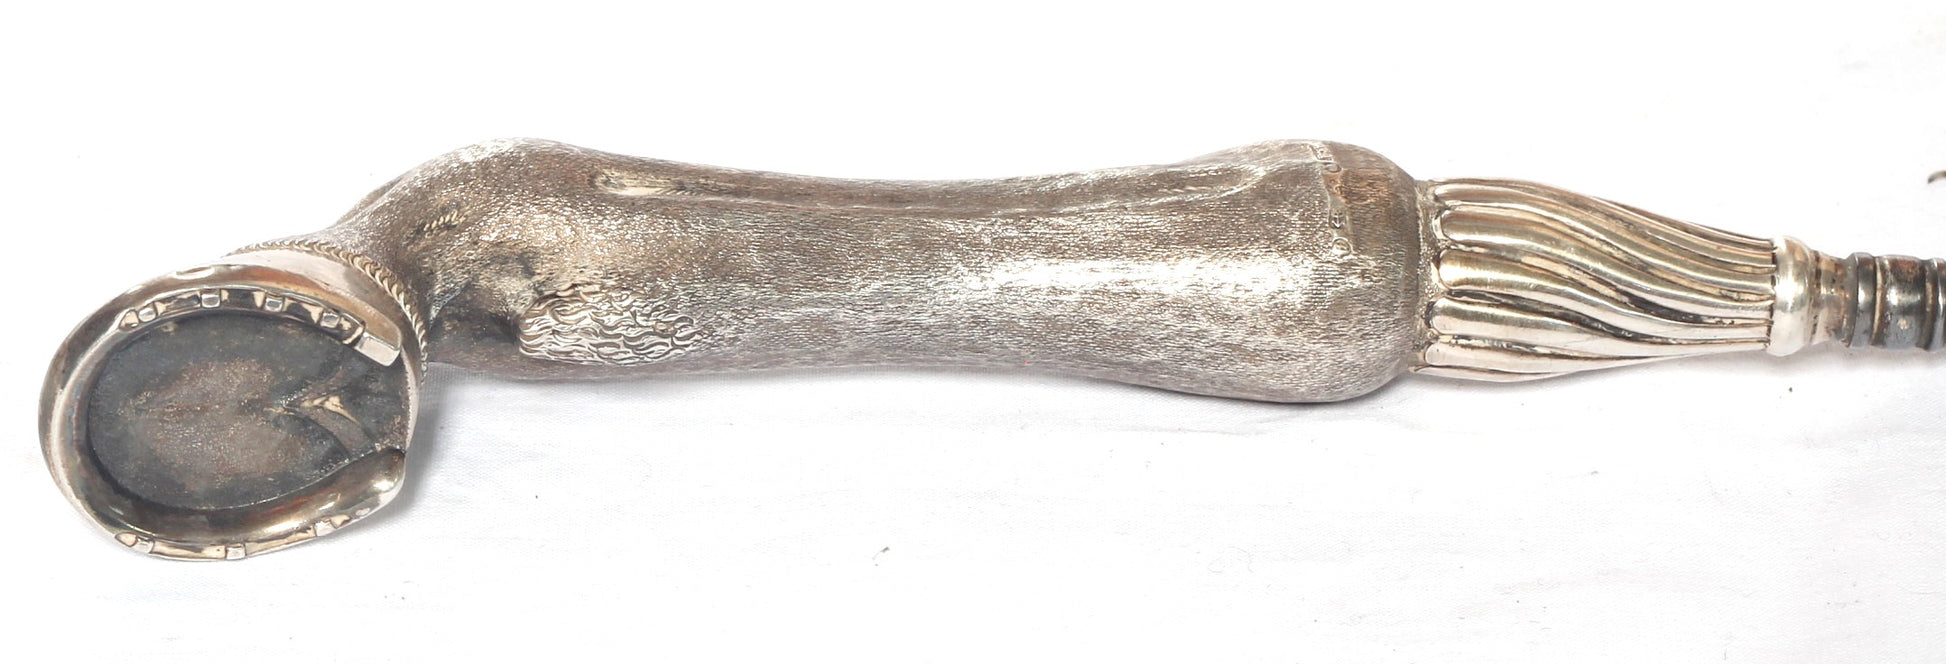 1899 Silver Hoof Handled Shoe Horn & Button Hook by Henry Charles Freeman